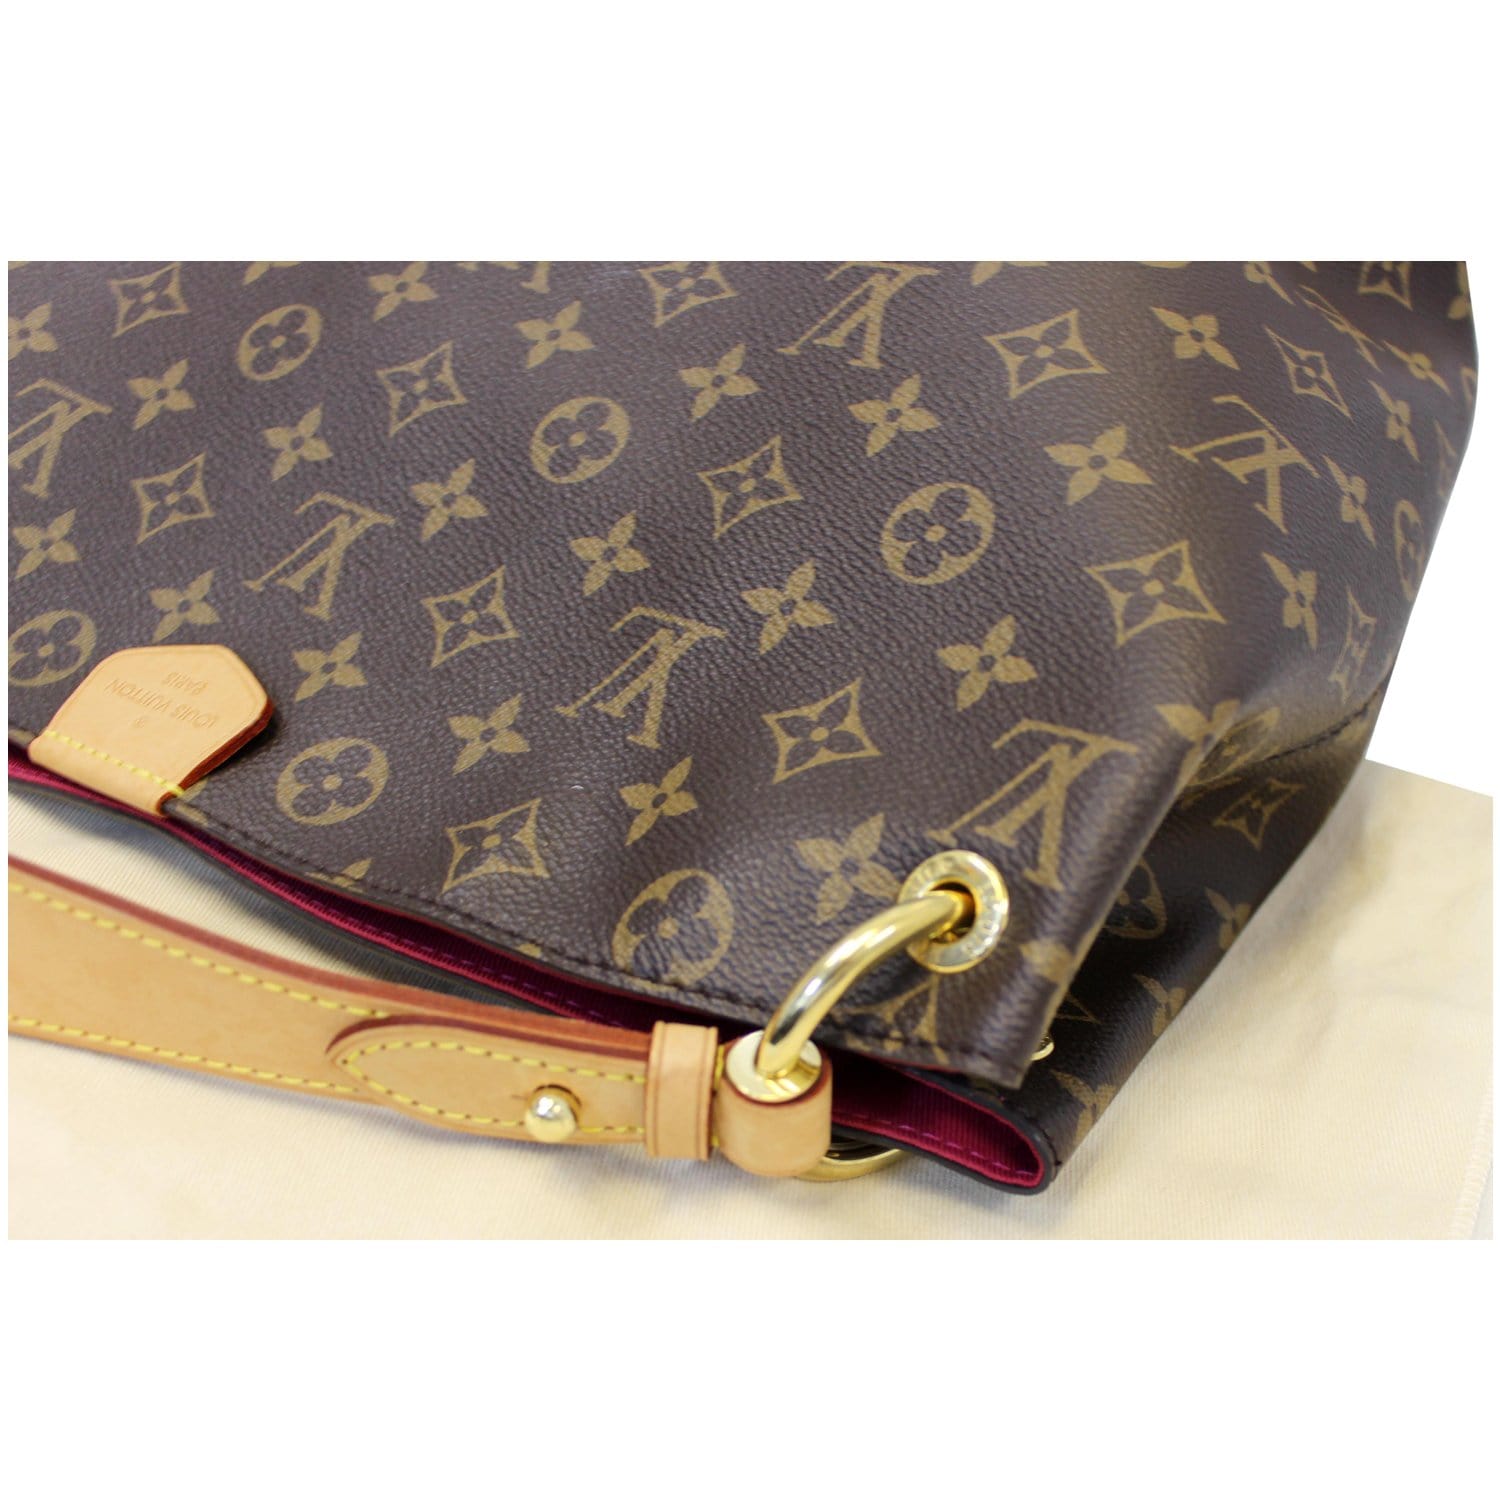 Louis+Vuitton+Graceful+PM+Brown+Leather for sale online